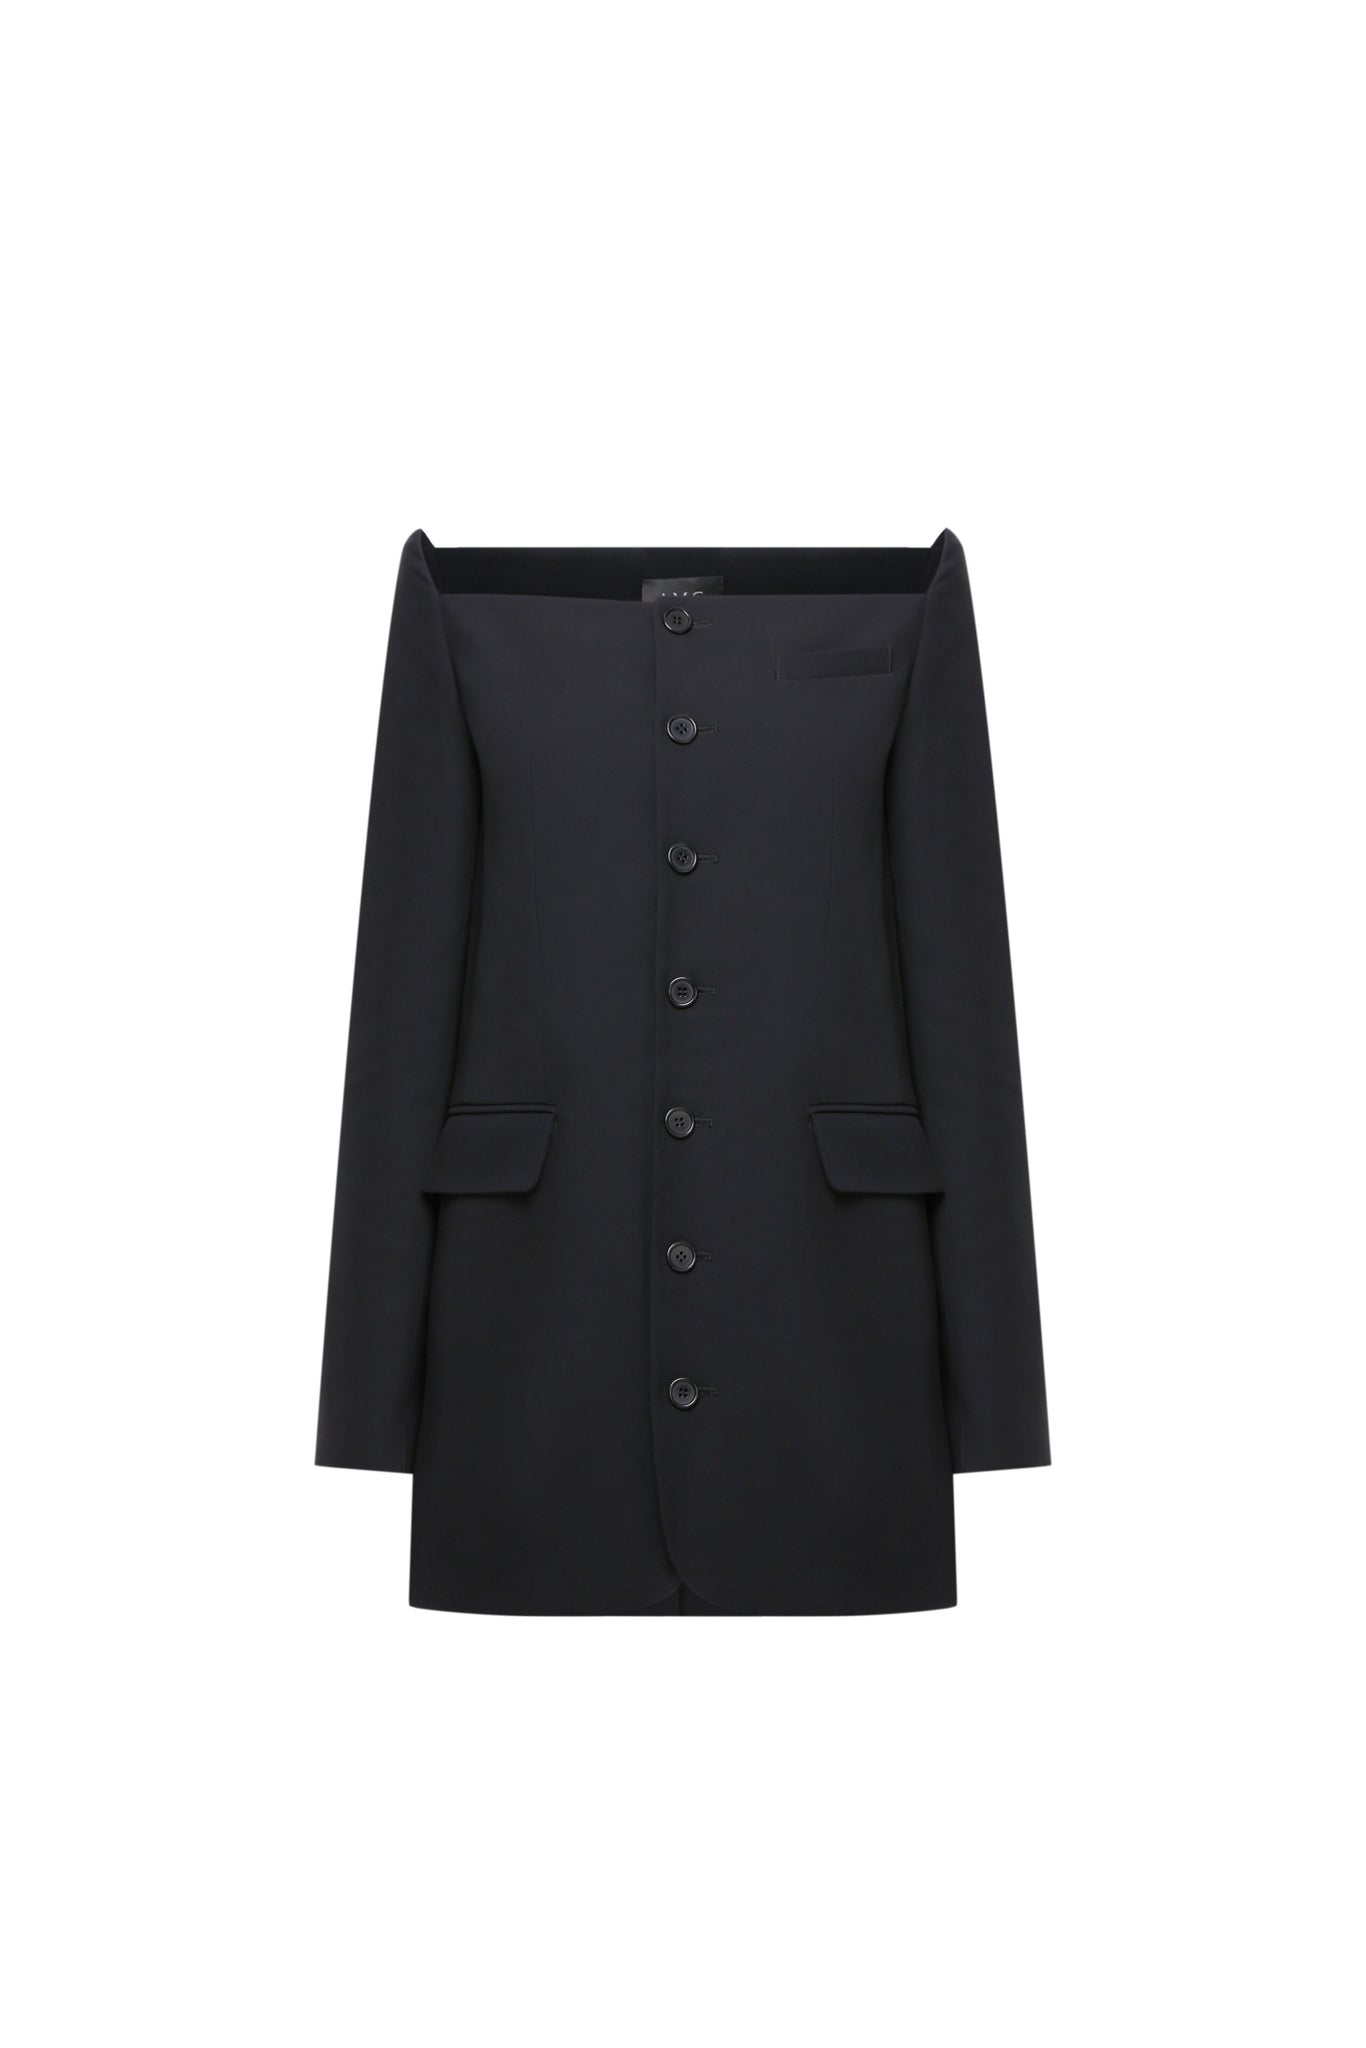 Blazer dress with buttons down the center